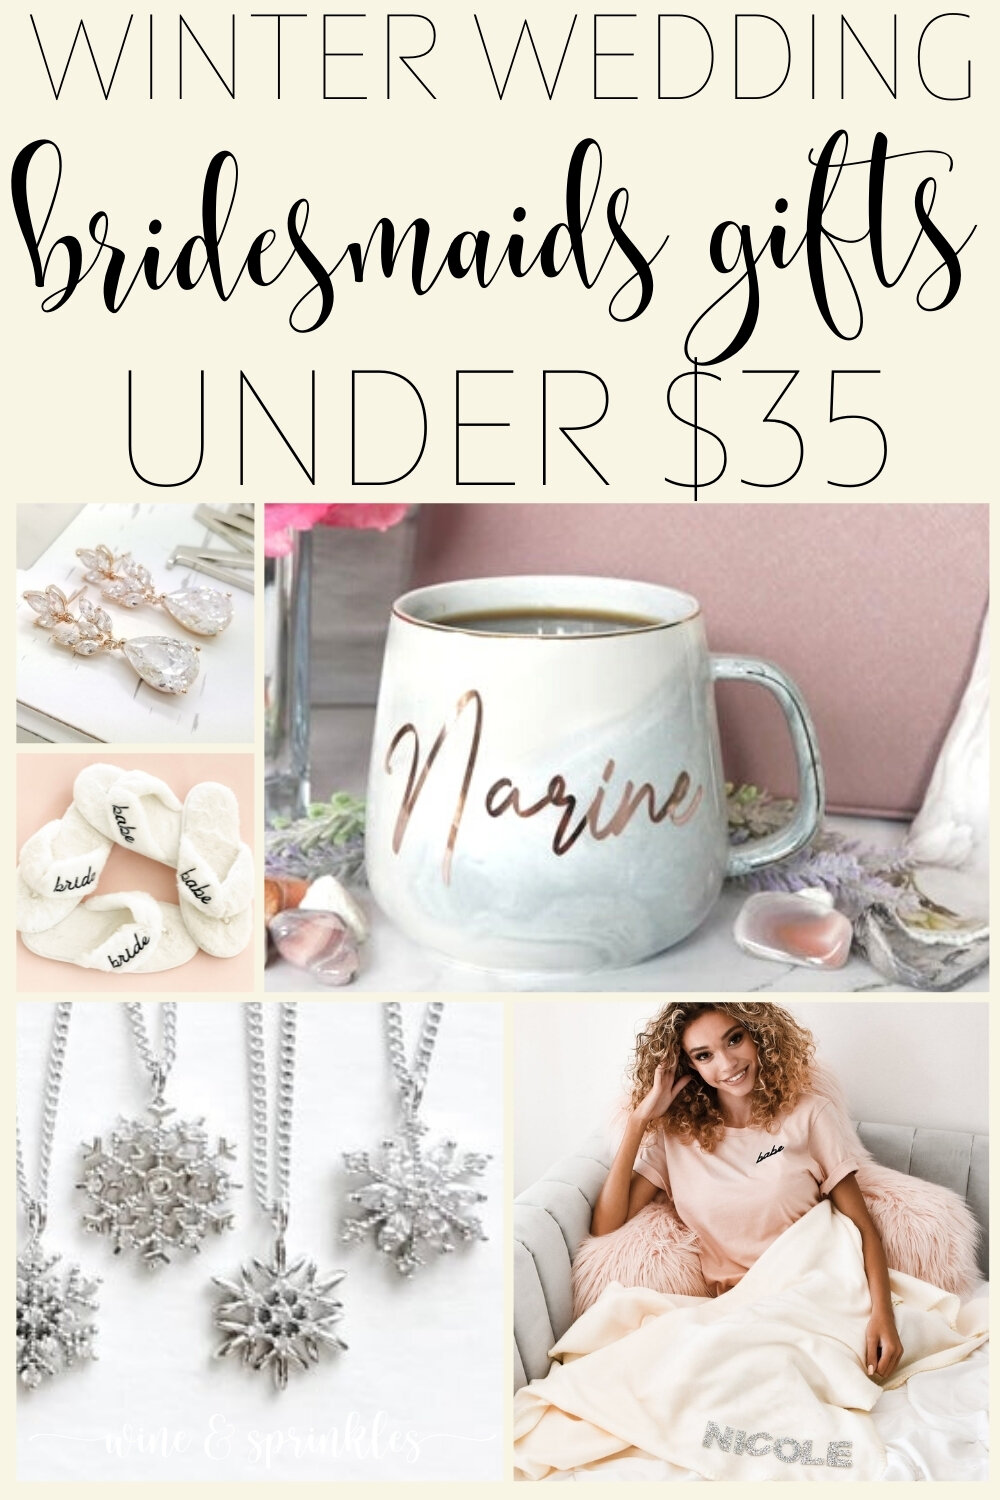 Unique Bridesmaids Gifts for a Winter Wedding Under $35